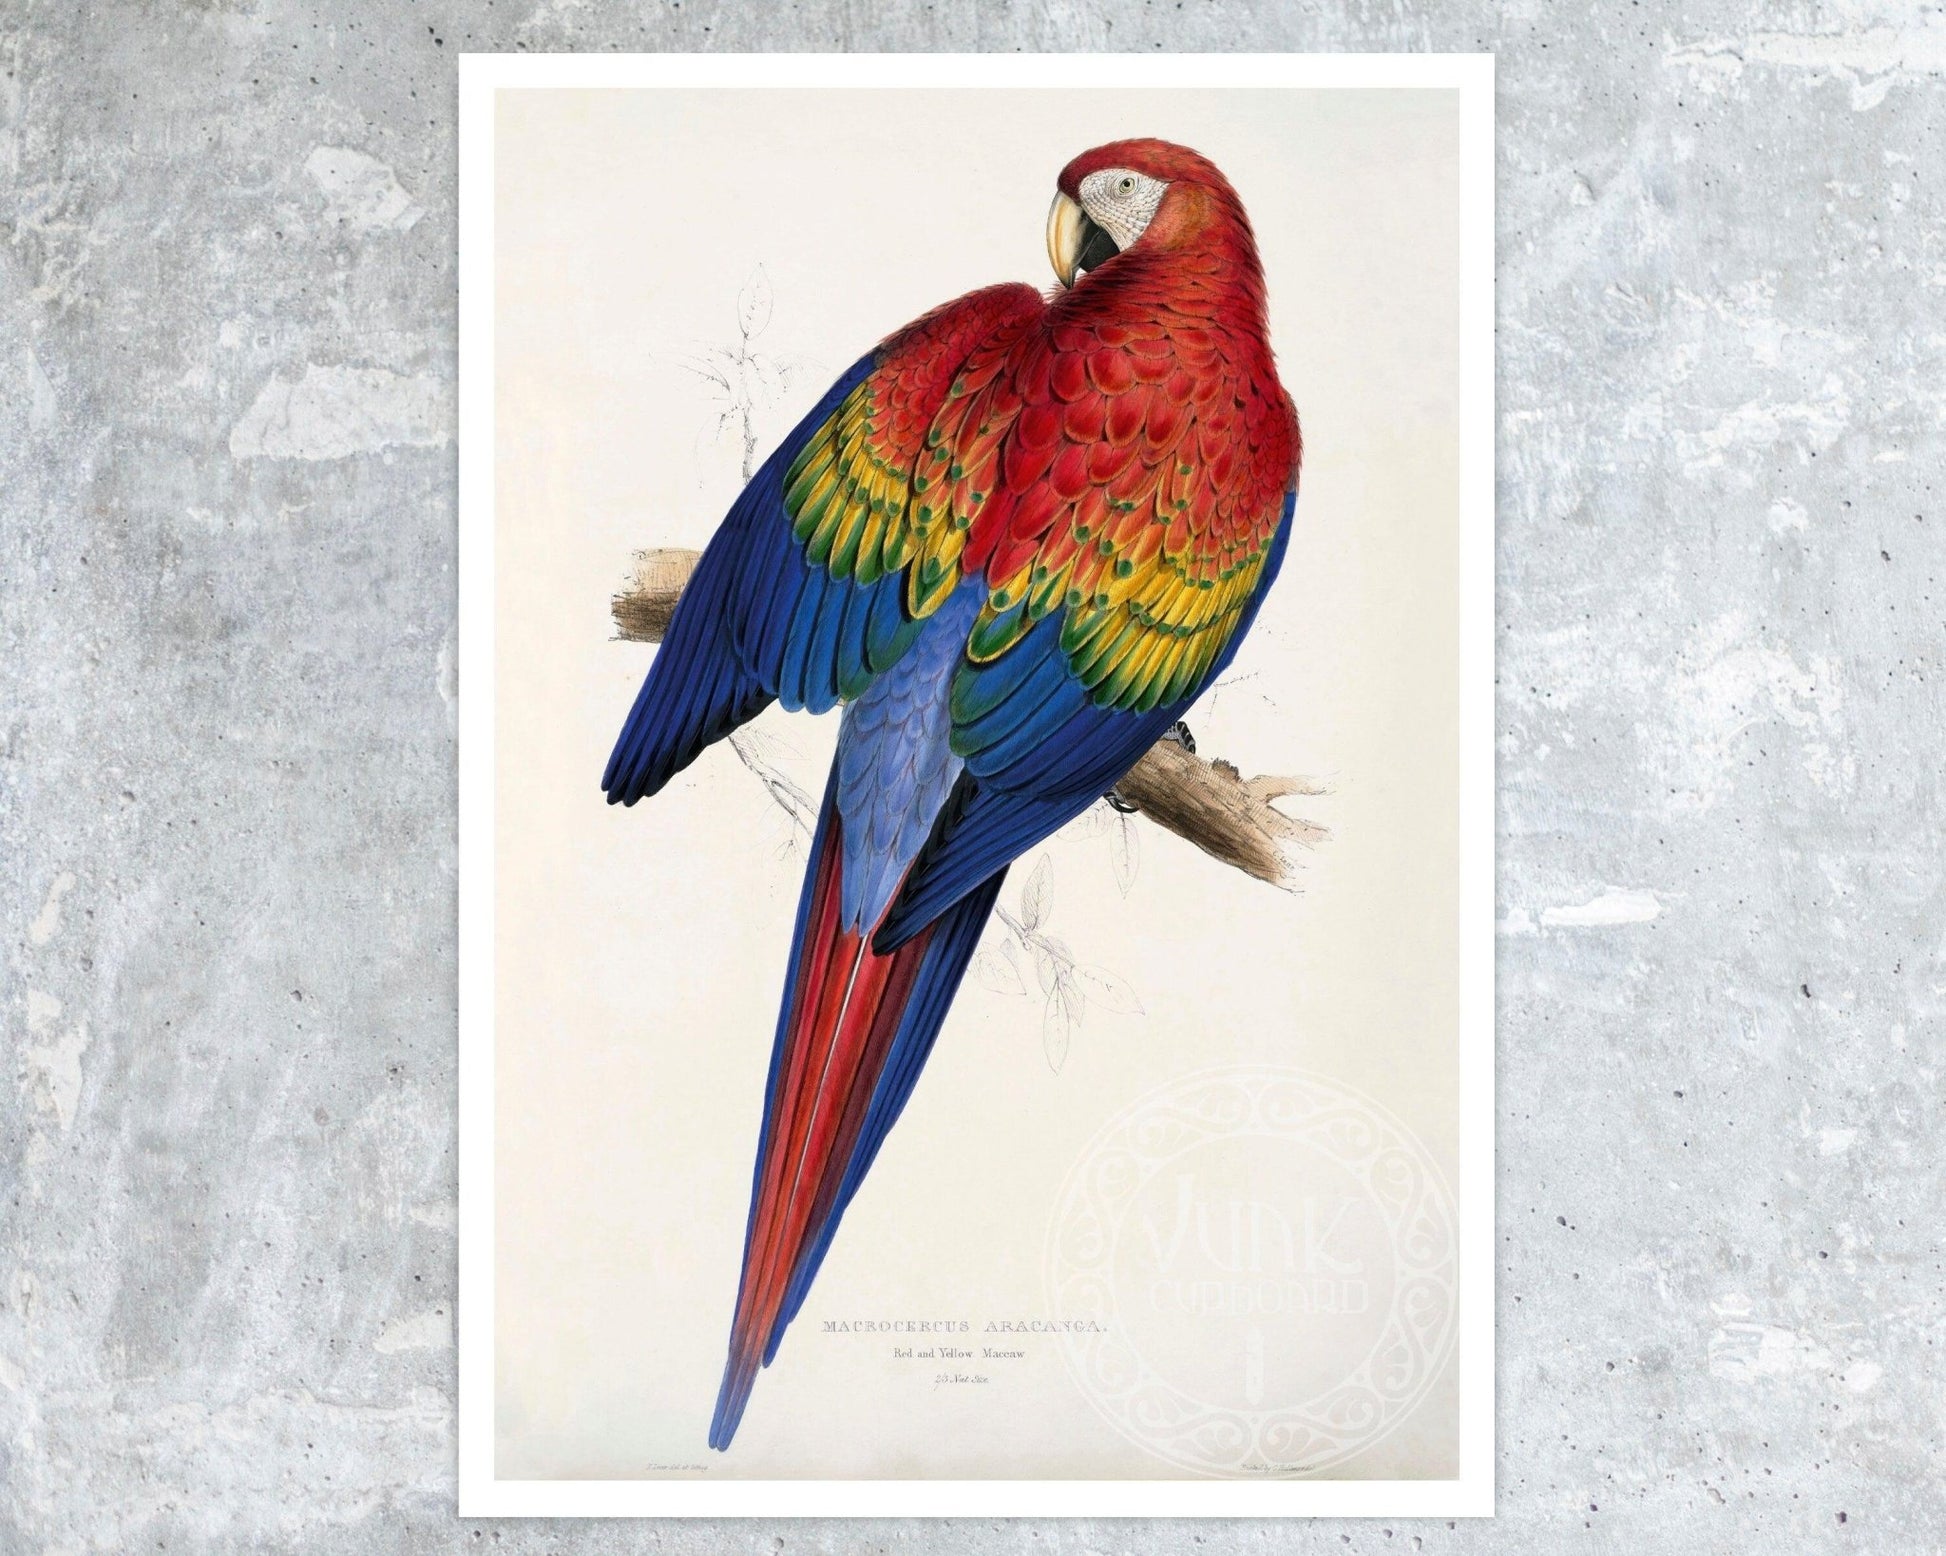 Set of 3 Vintage Parrot Illustrations by Edward Lear (c.1883) - Mabon Gallery